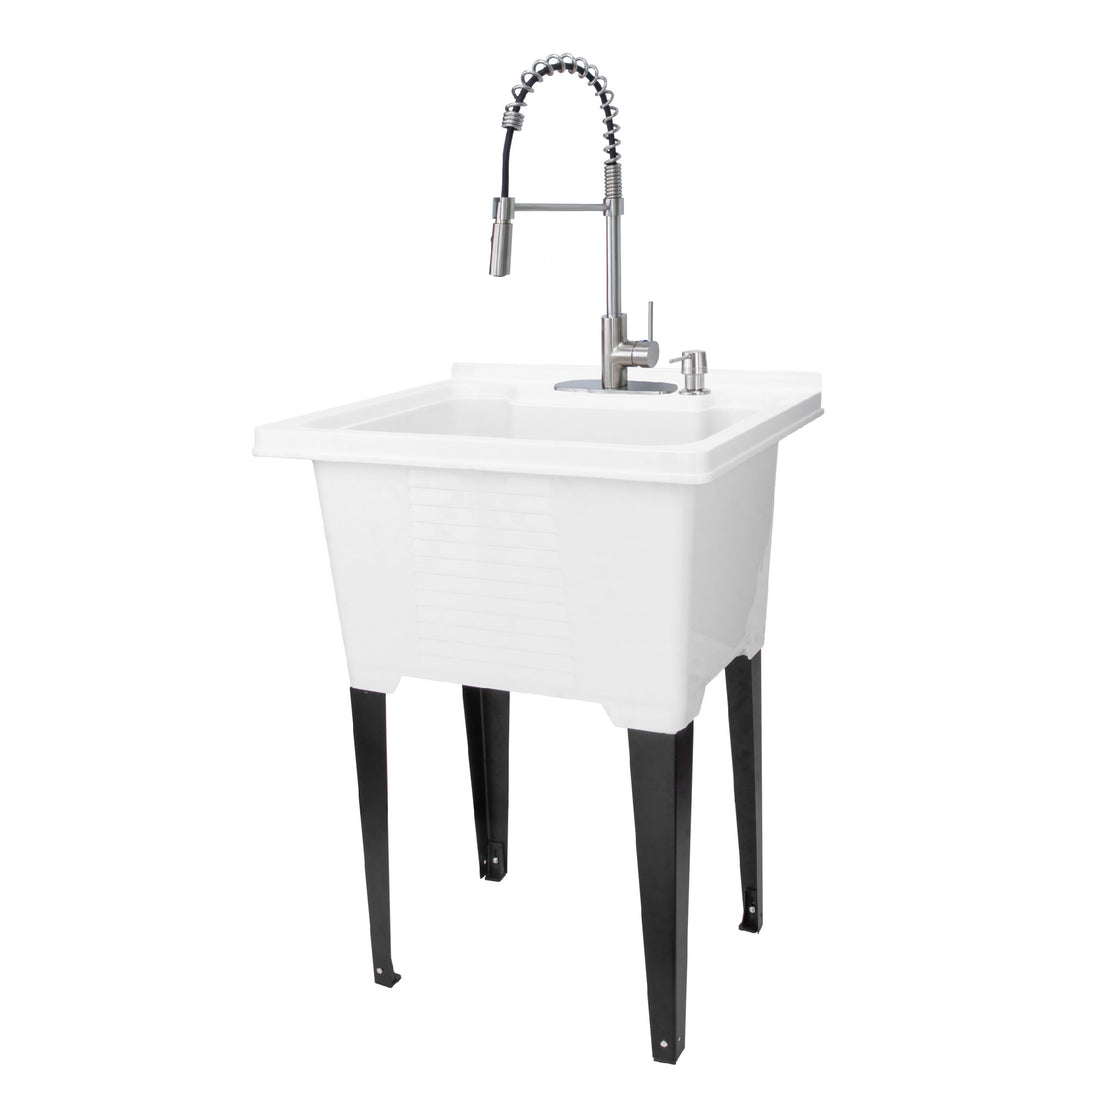 Tehila Luxe Freestanding White Utility Sink with Stainless Steel Finish High-Arc Coil Pull-Down Faucet - Utility sinks vanites Tehila